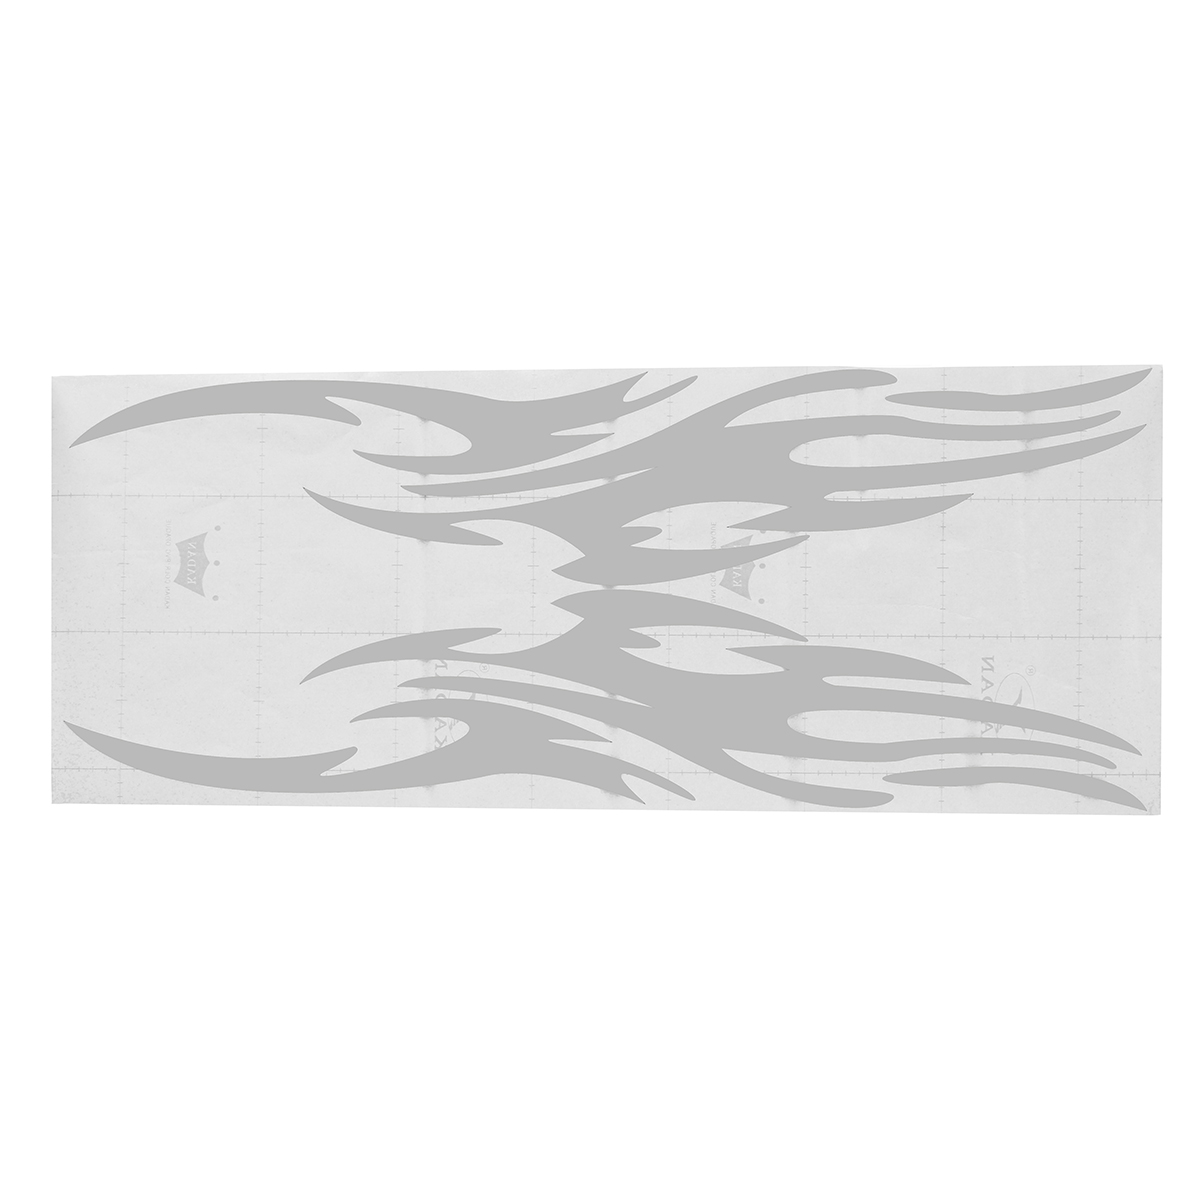 Motorcycle Car Flame Fire Hood Decal Vinyl Graphic Fashion Sticker Universal